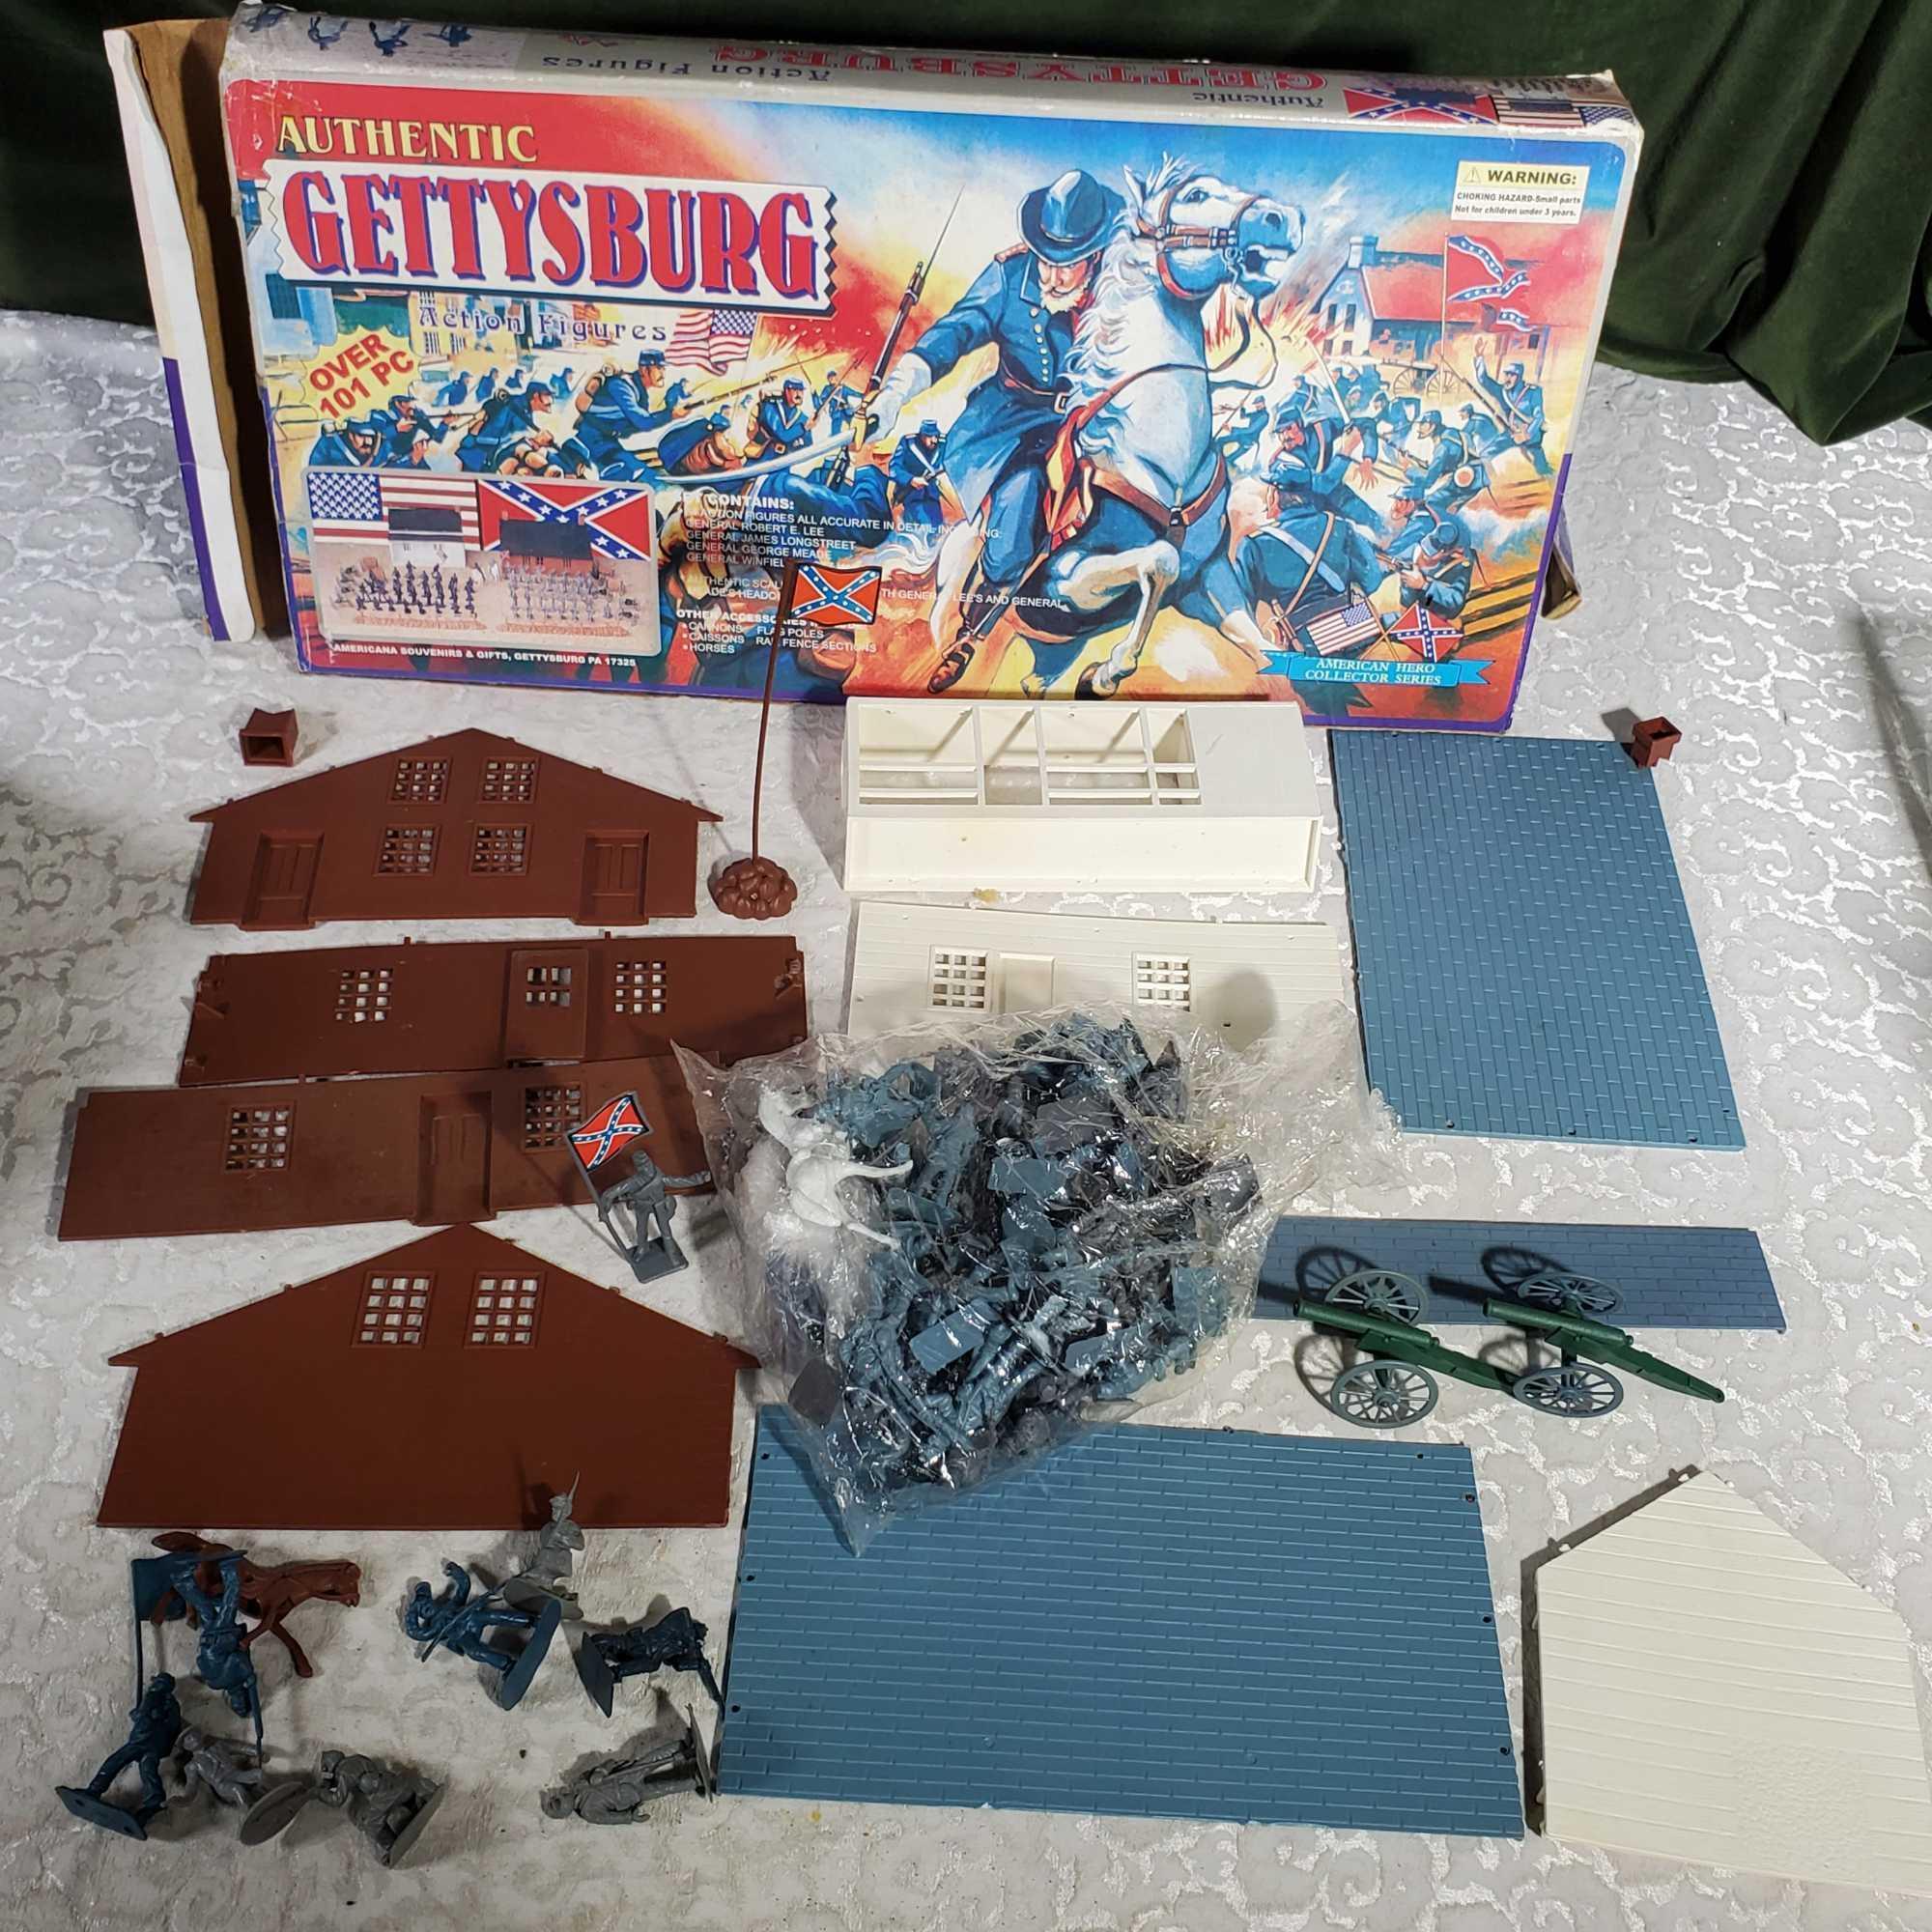 2 Gettysburg Action Figure Play Sets and 2 Marvel 12" Action Figures